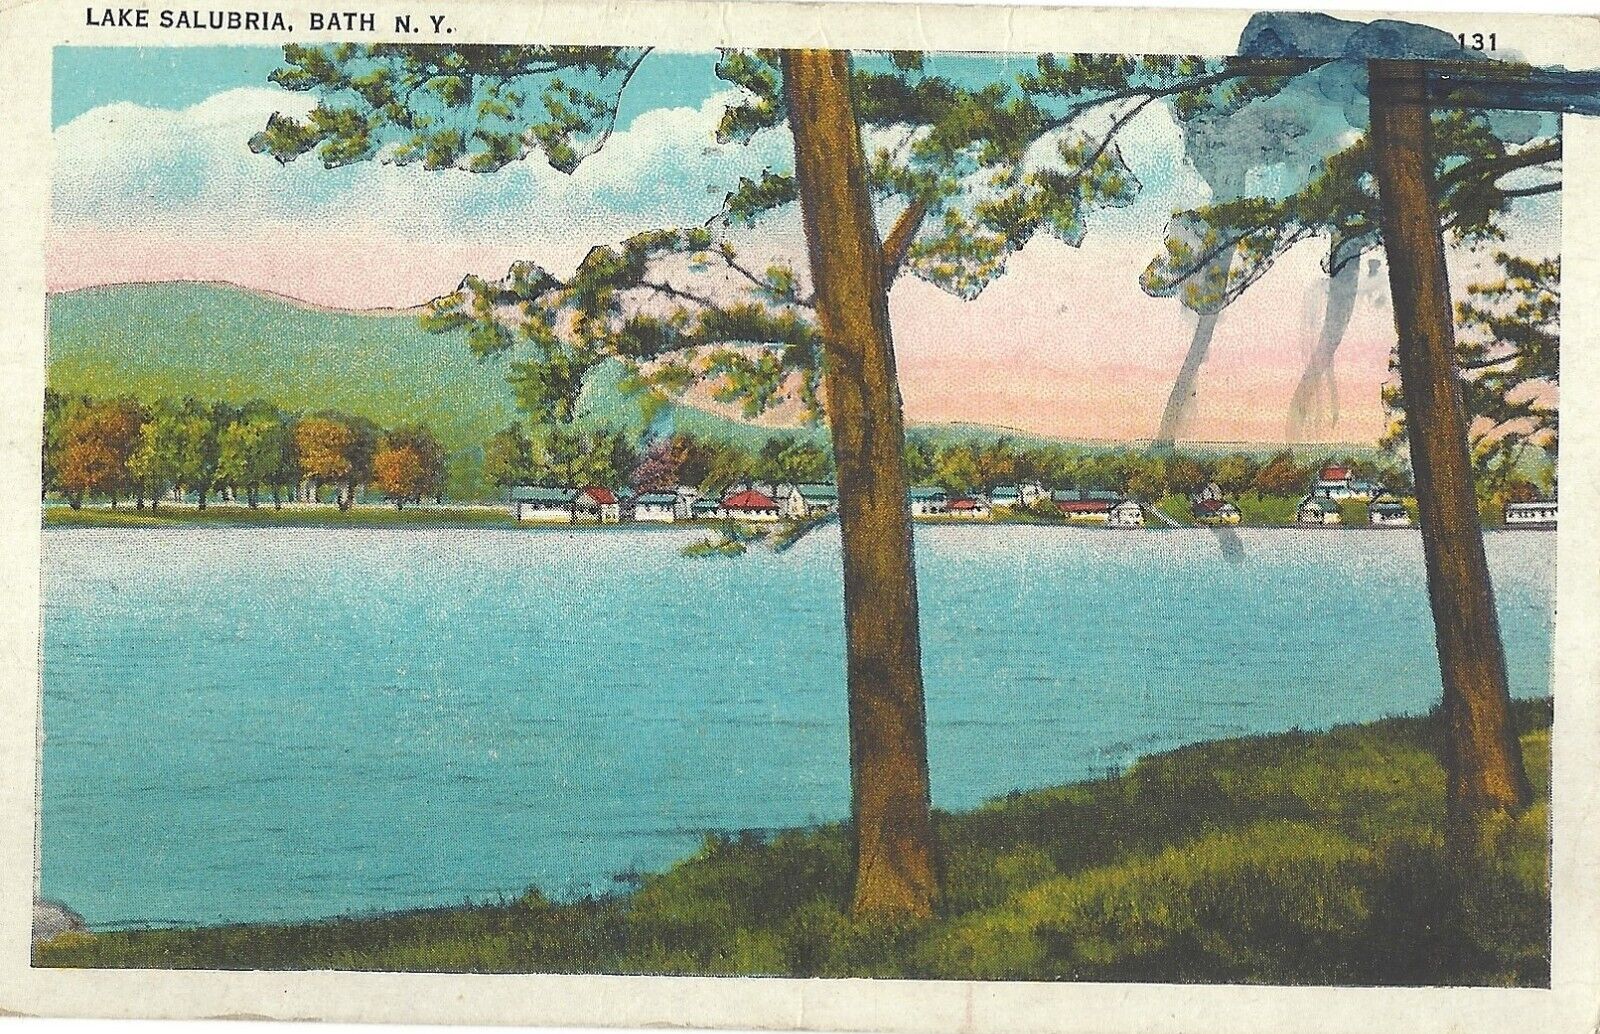 NY, Bath, view of Lake Salubria, 1936 postcard (STAMPS, POSTAGE, COLLECTIBLE)